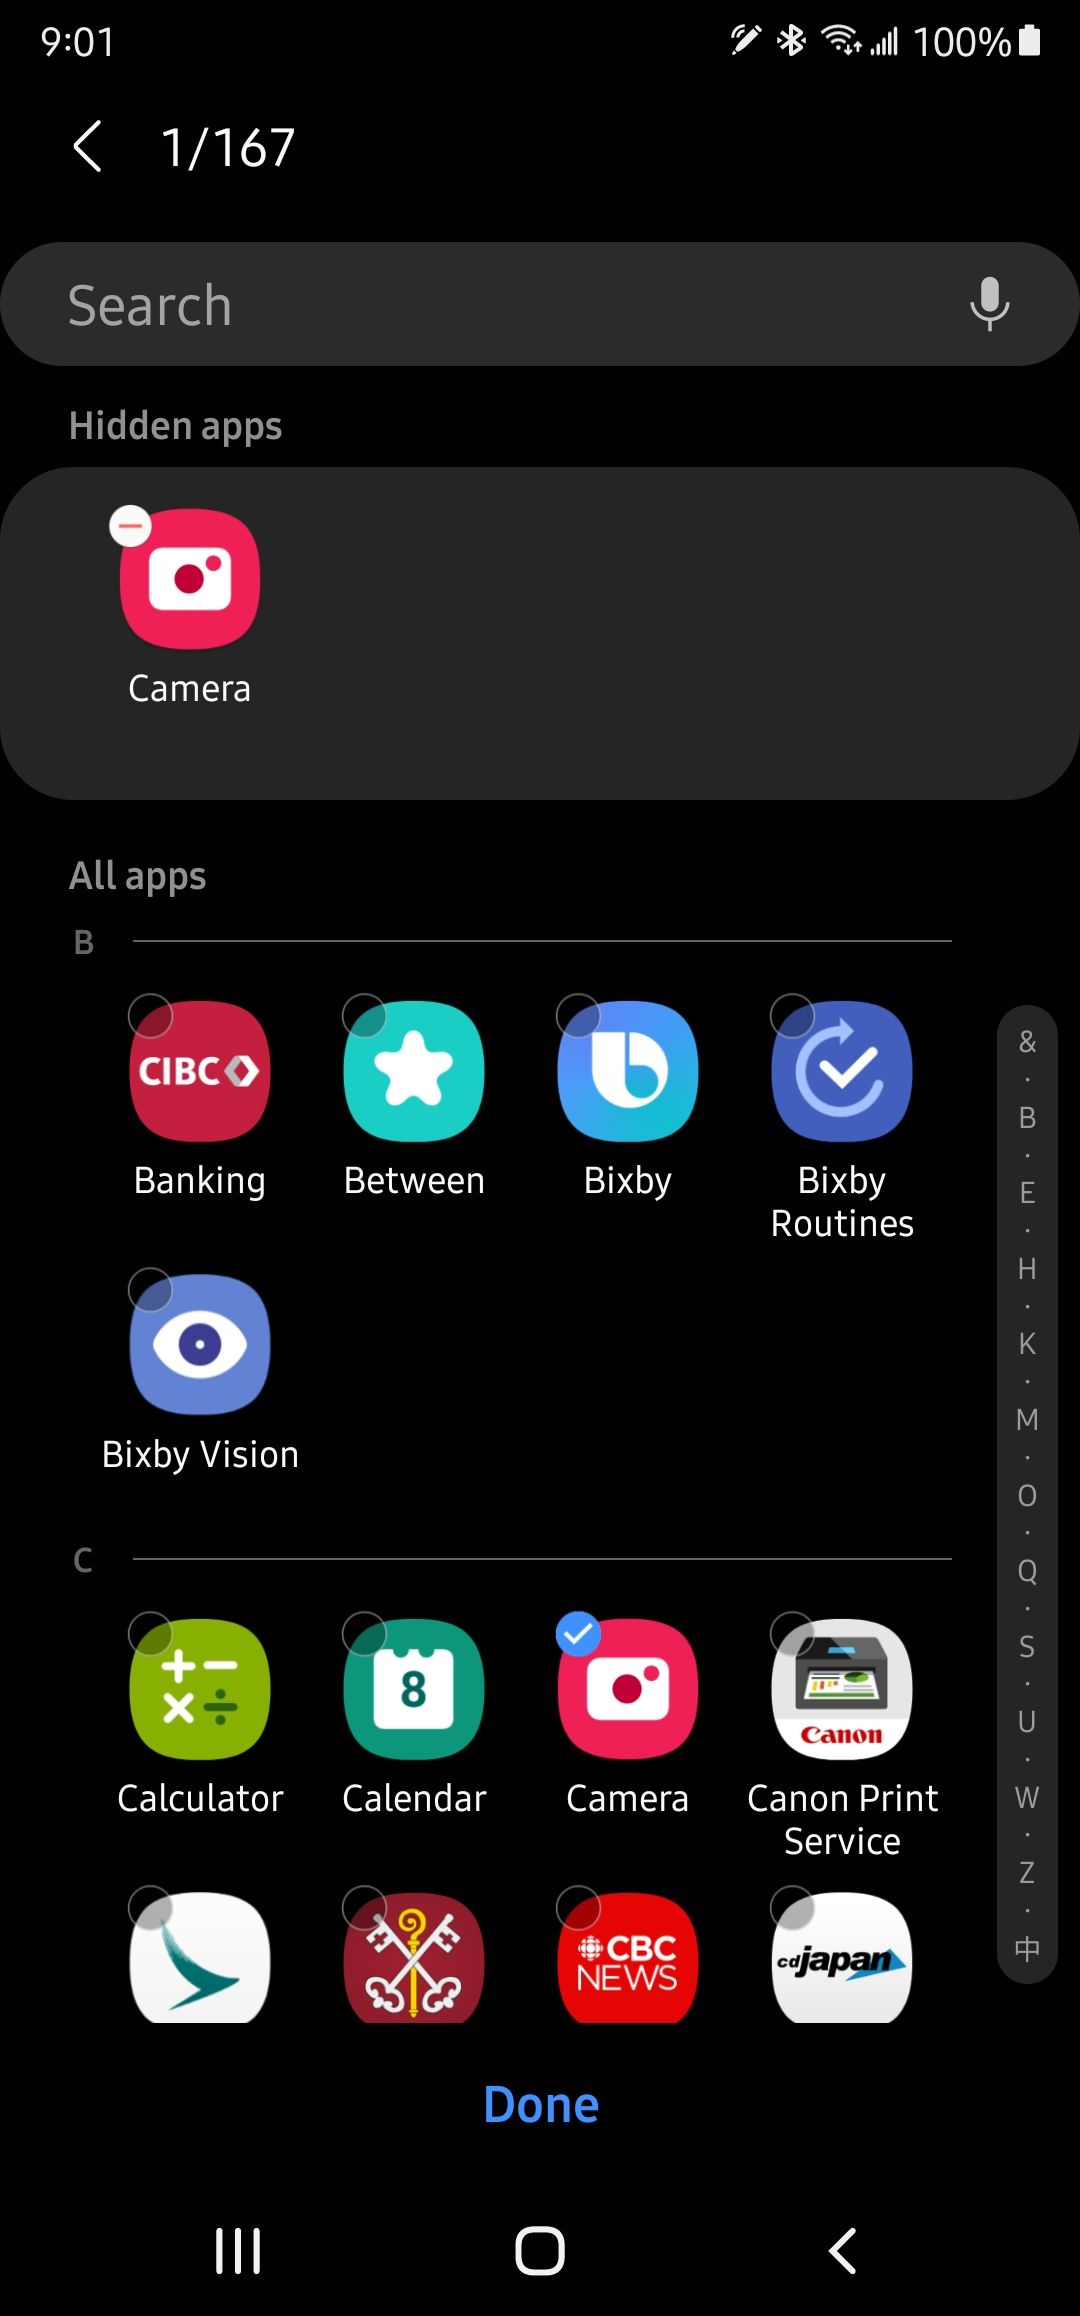 Camera App not showing up under phone apps - Samsung Members